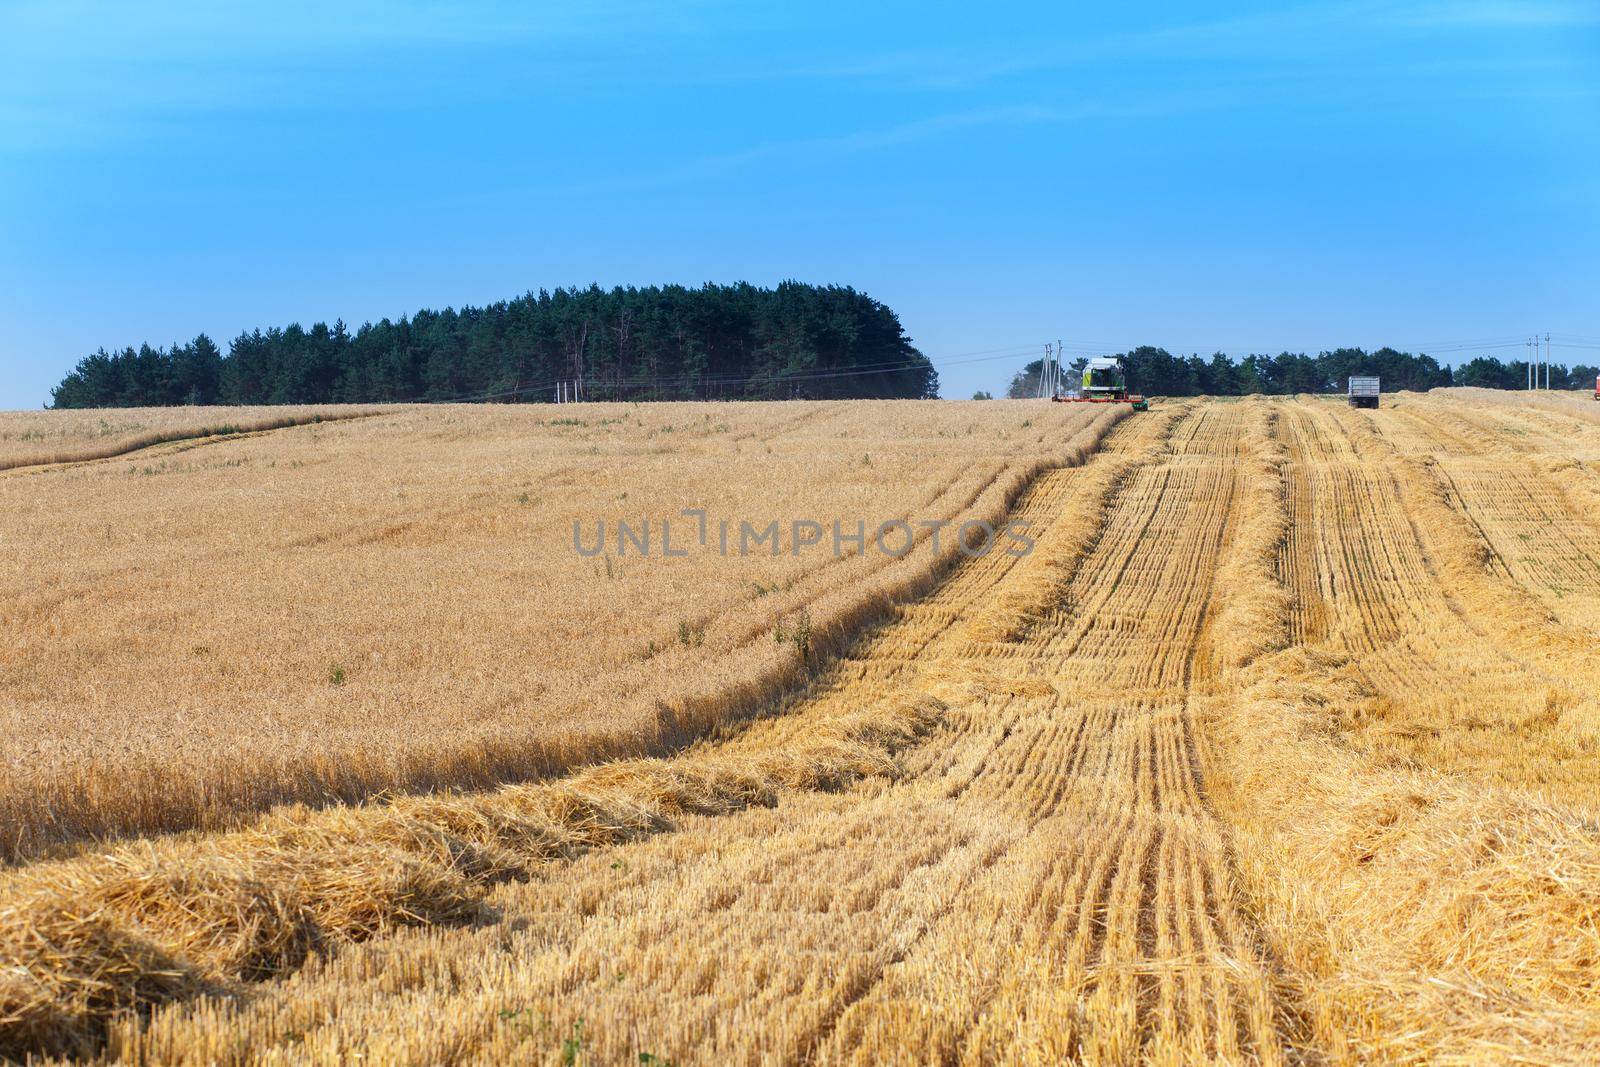 combine harvester working by BY-_-BY